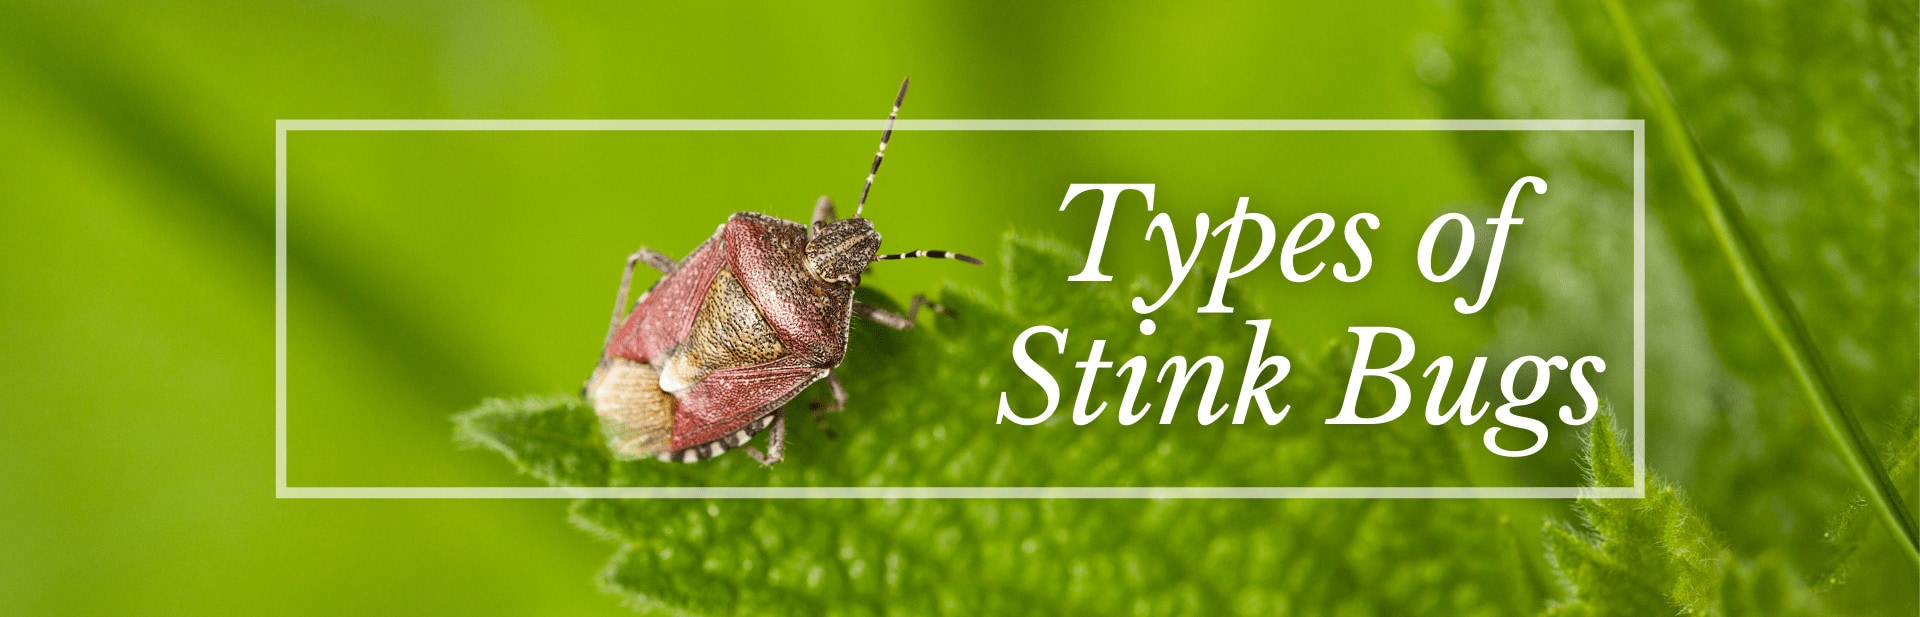 Types of Stink Bugs: Field Guide (Names & Photos)